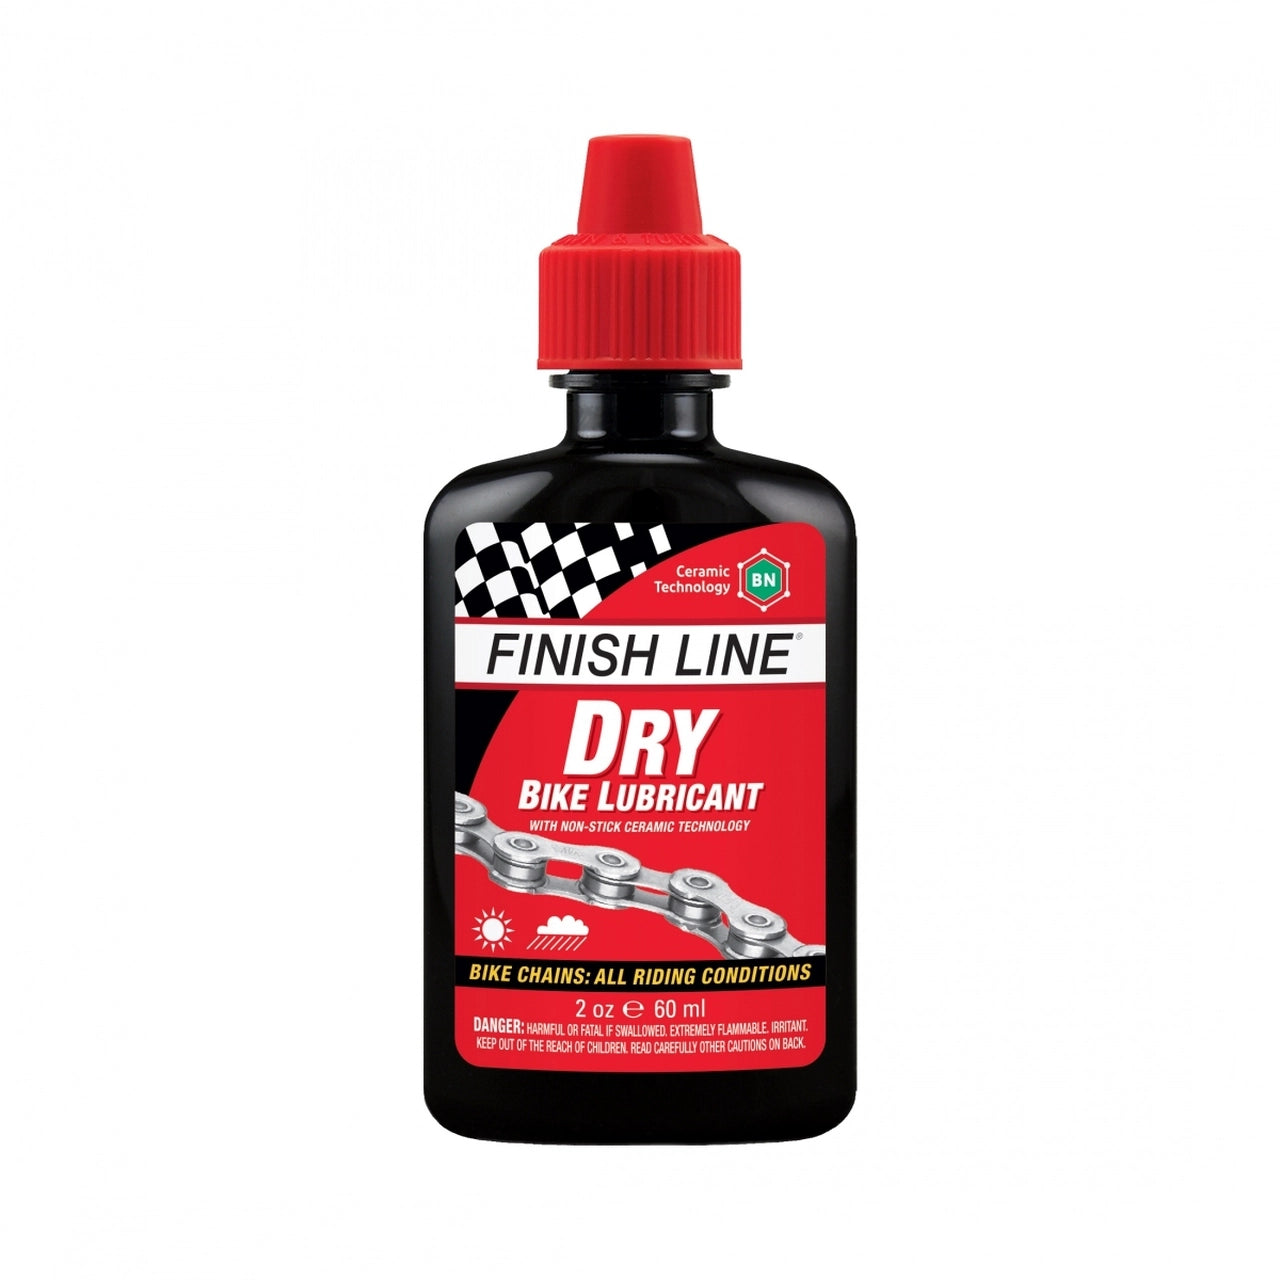 Muc-Off Dry Lube - The Spoke Easy